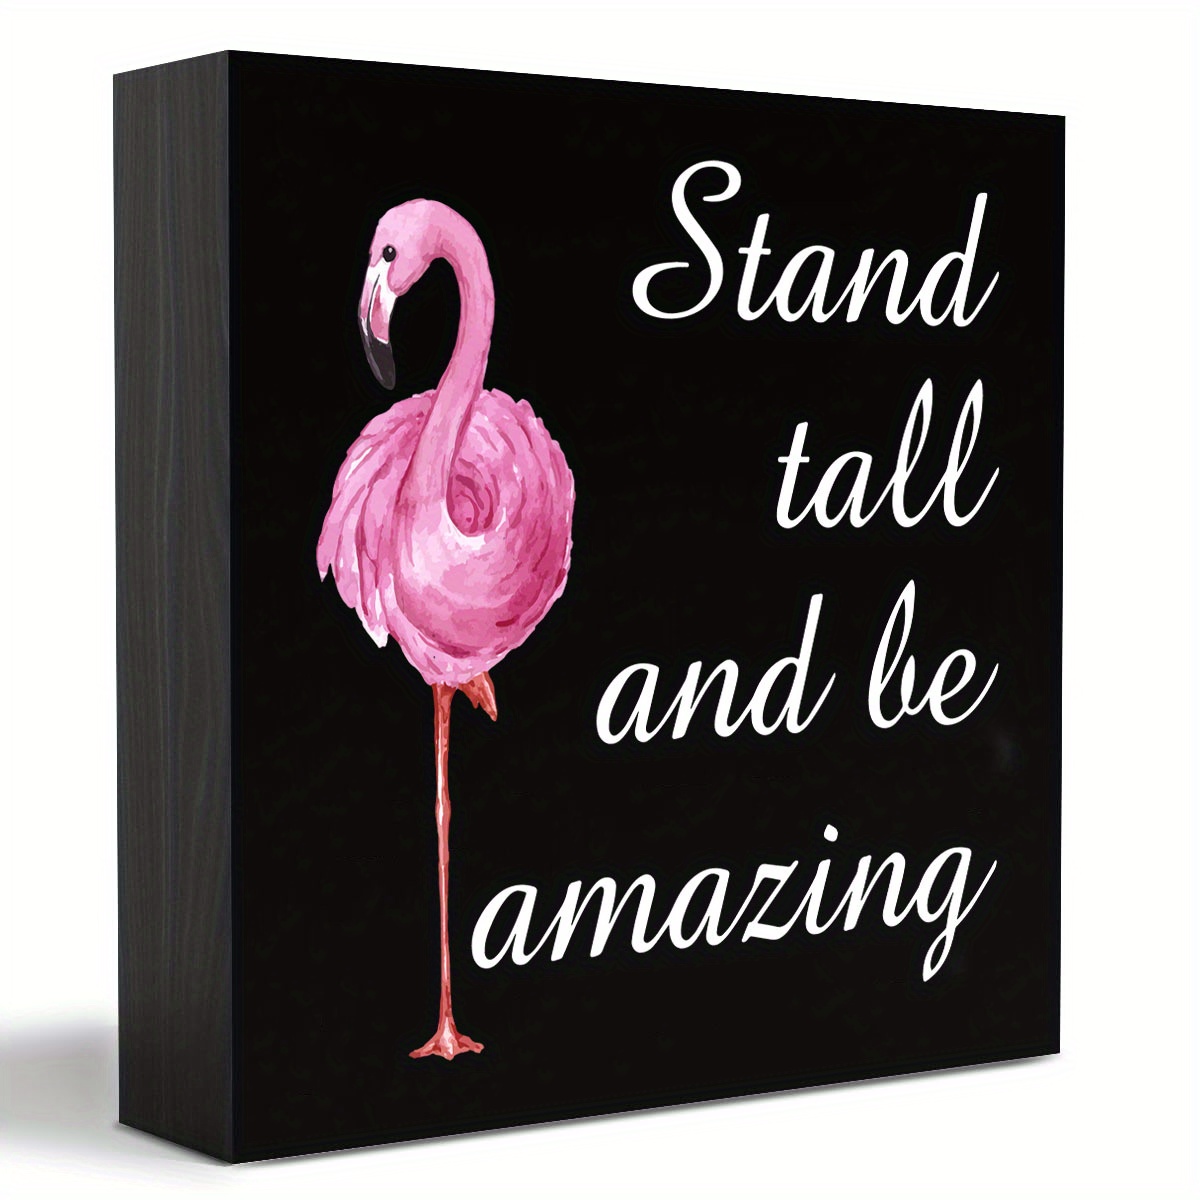 

1pc, Pink Flamingo Canvas Prints Wall Art Decor Desk Sign, Stand Tall And Be Amazing Flamingo Quote Poster Painting Framed Artwork Rustic Home Shelf Wall Decoration